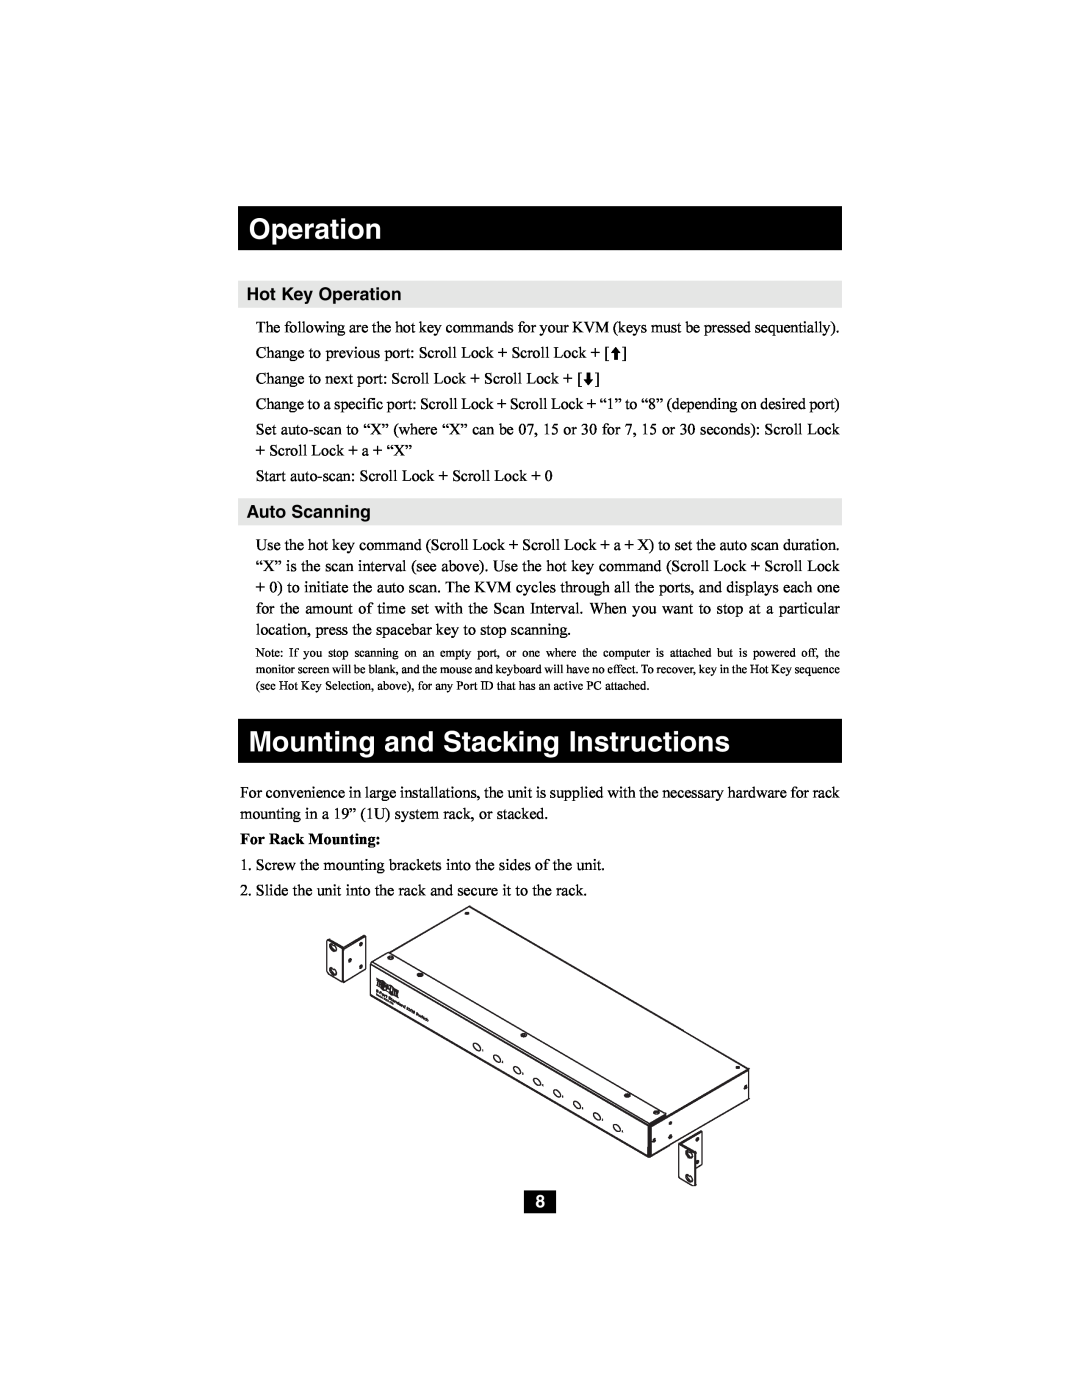 Tripp Lite B004-008 owner manual Mounting and Stacking Instructions, Hot Key Operation, Auto Scanning 